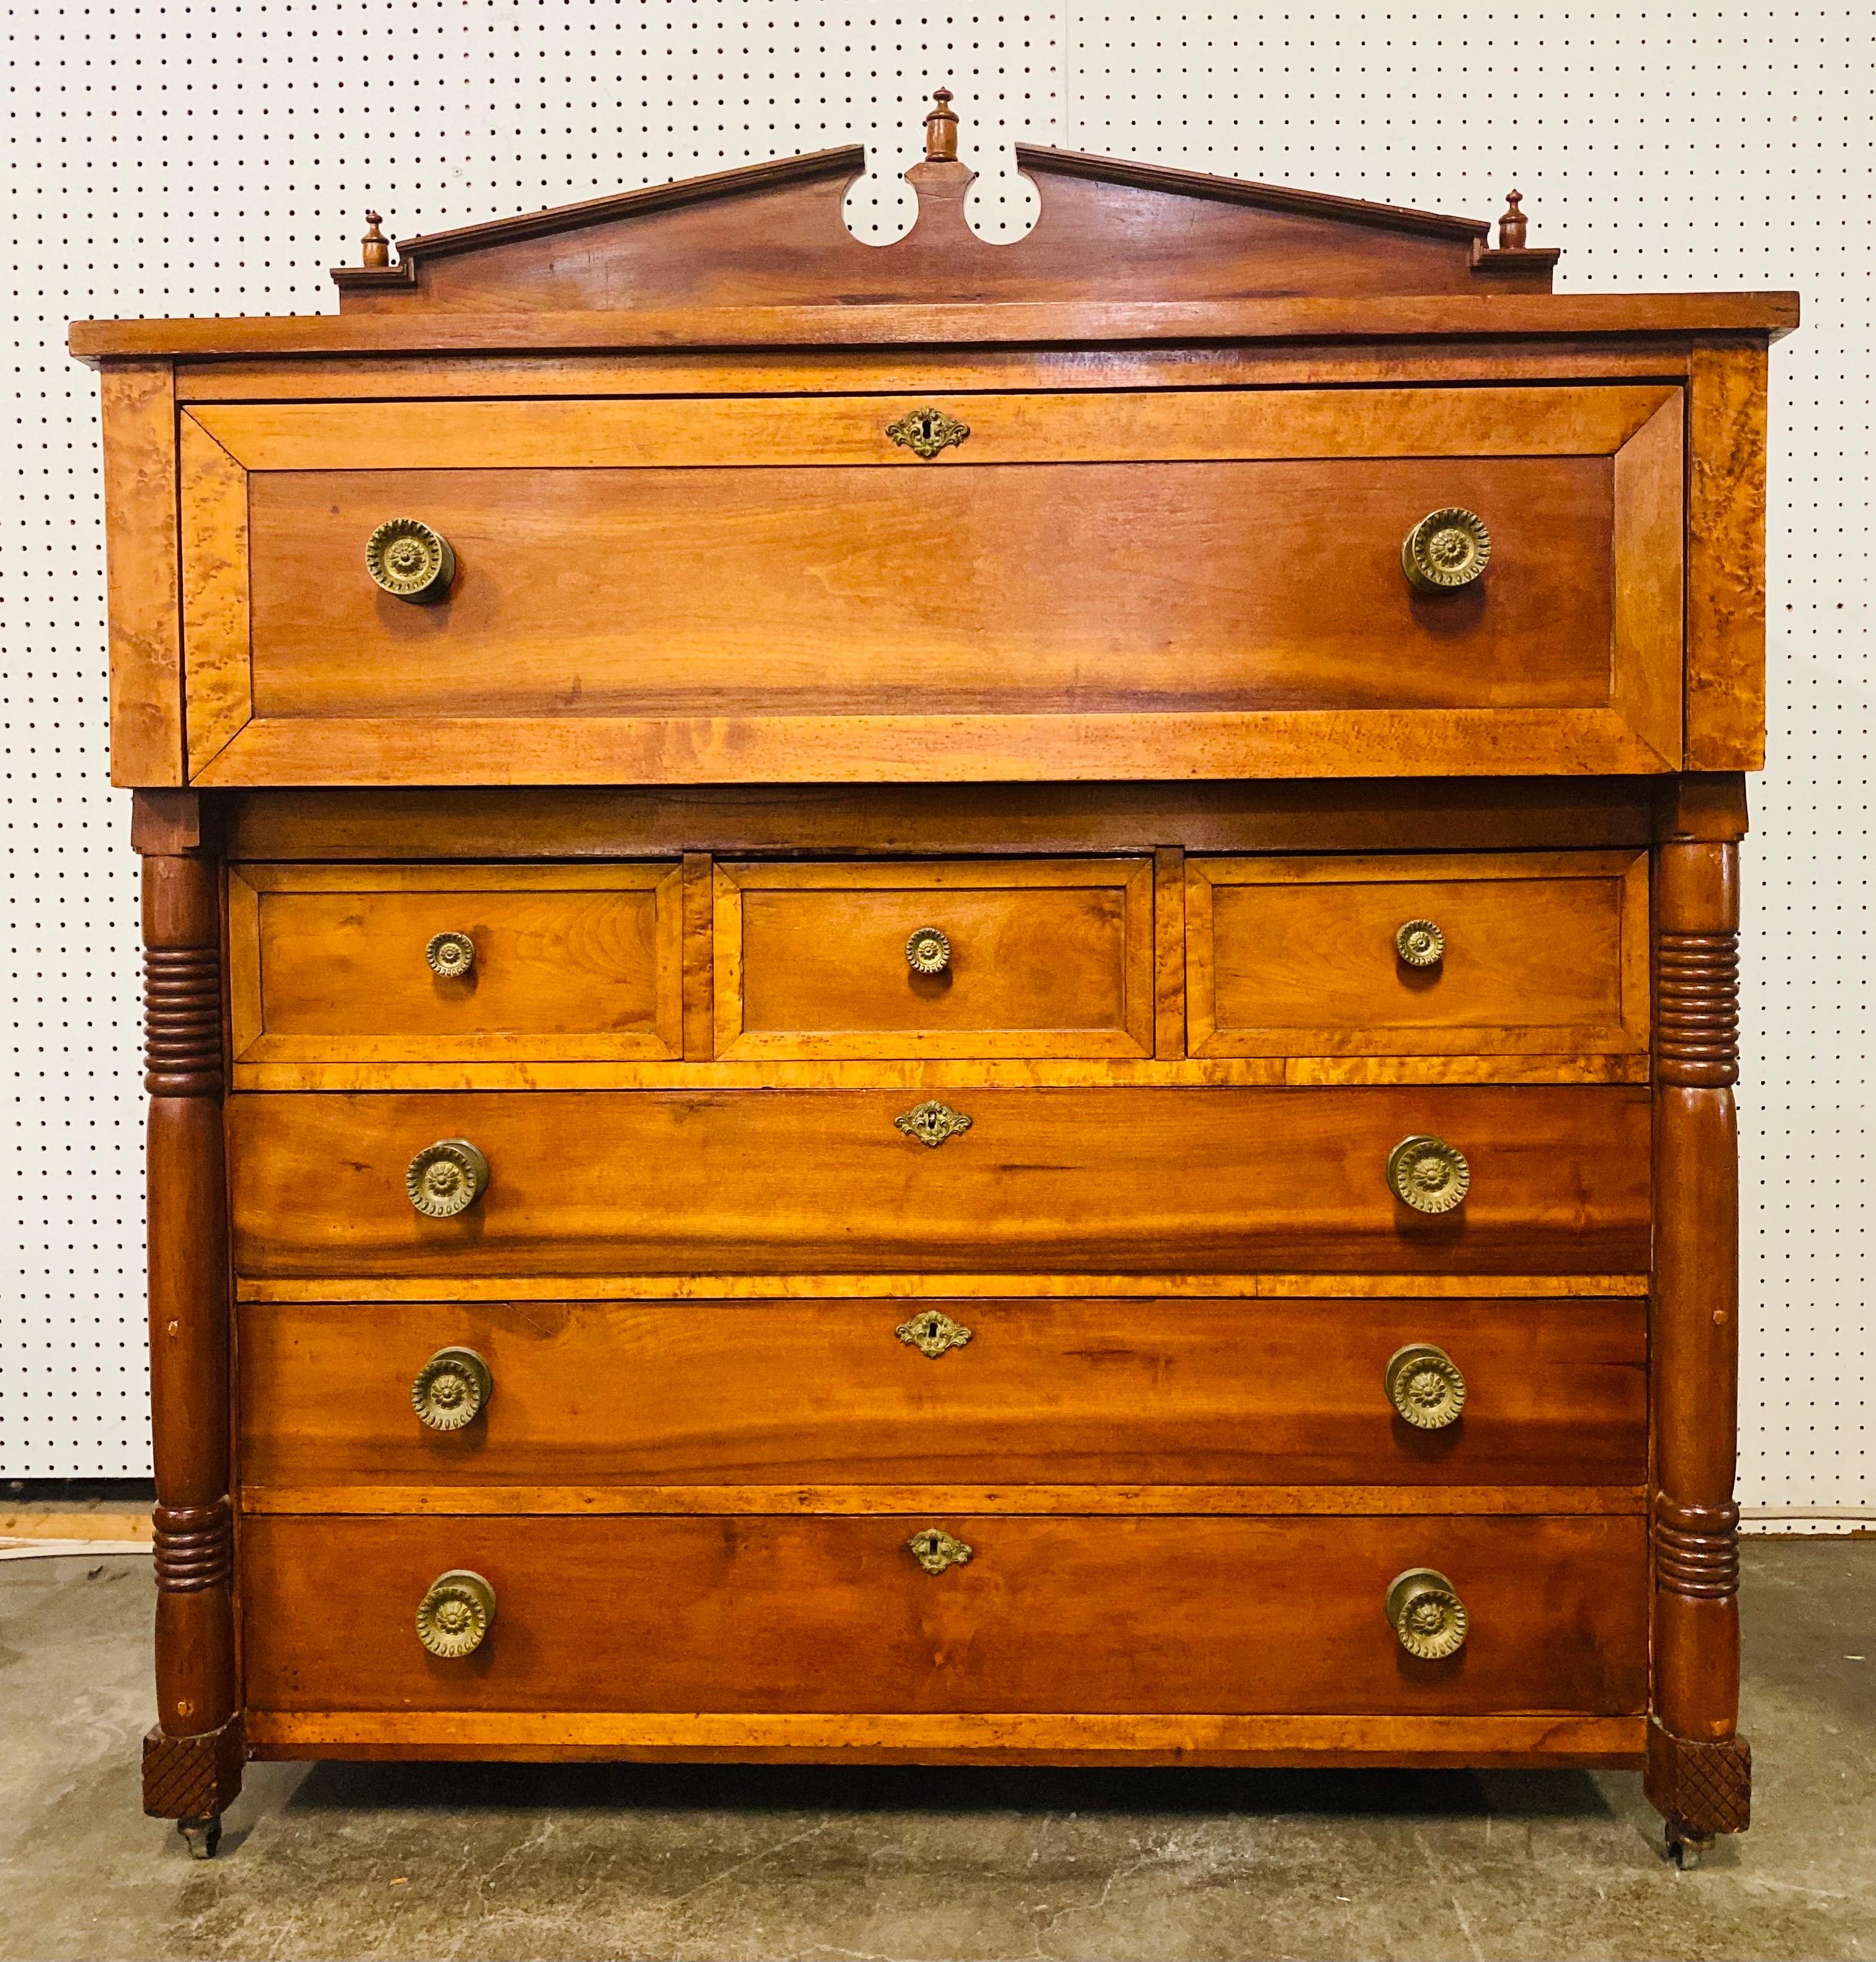 Handsome 19th century American Empire handcrafted Chester drawers For Sale 1